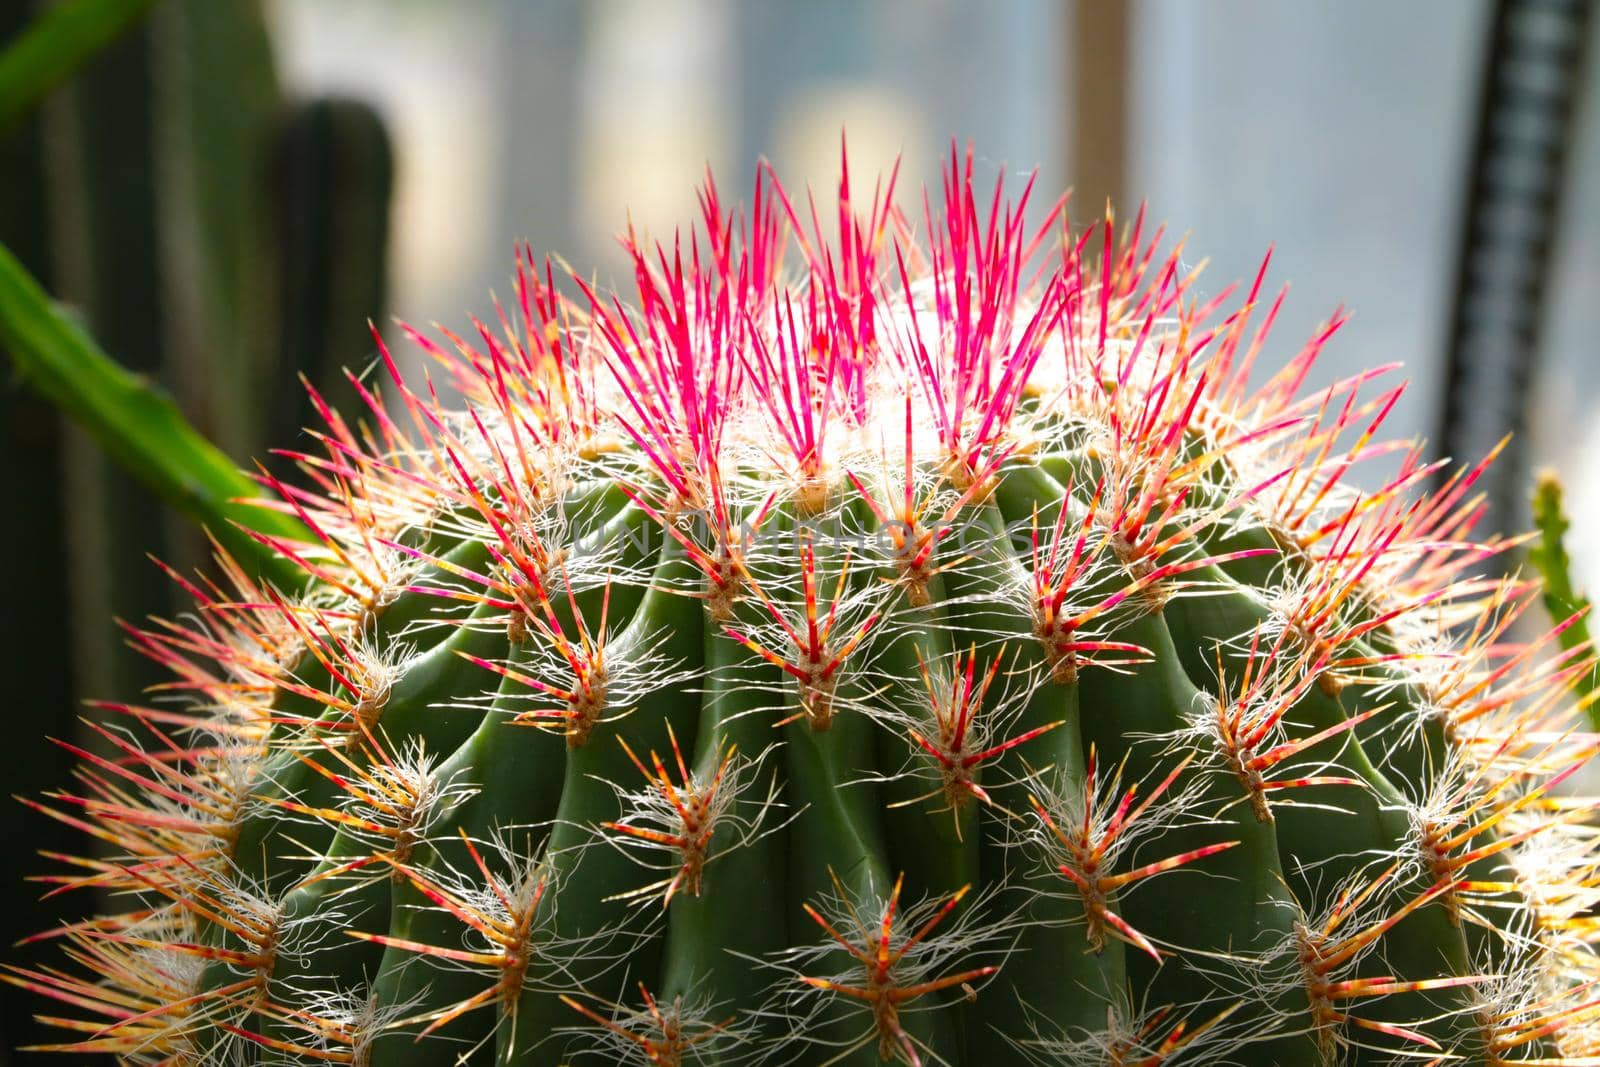 Close-up of a flowering cactus with large needles, a houseplant